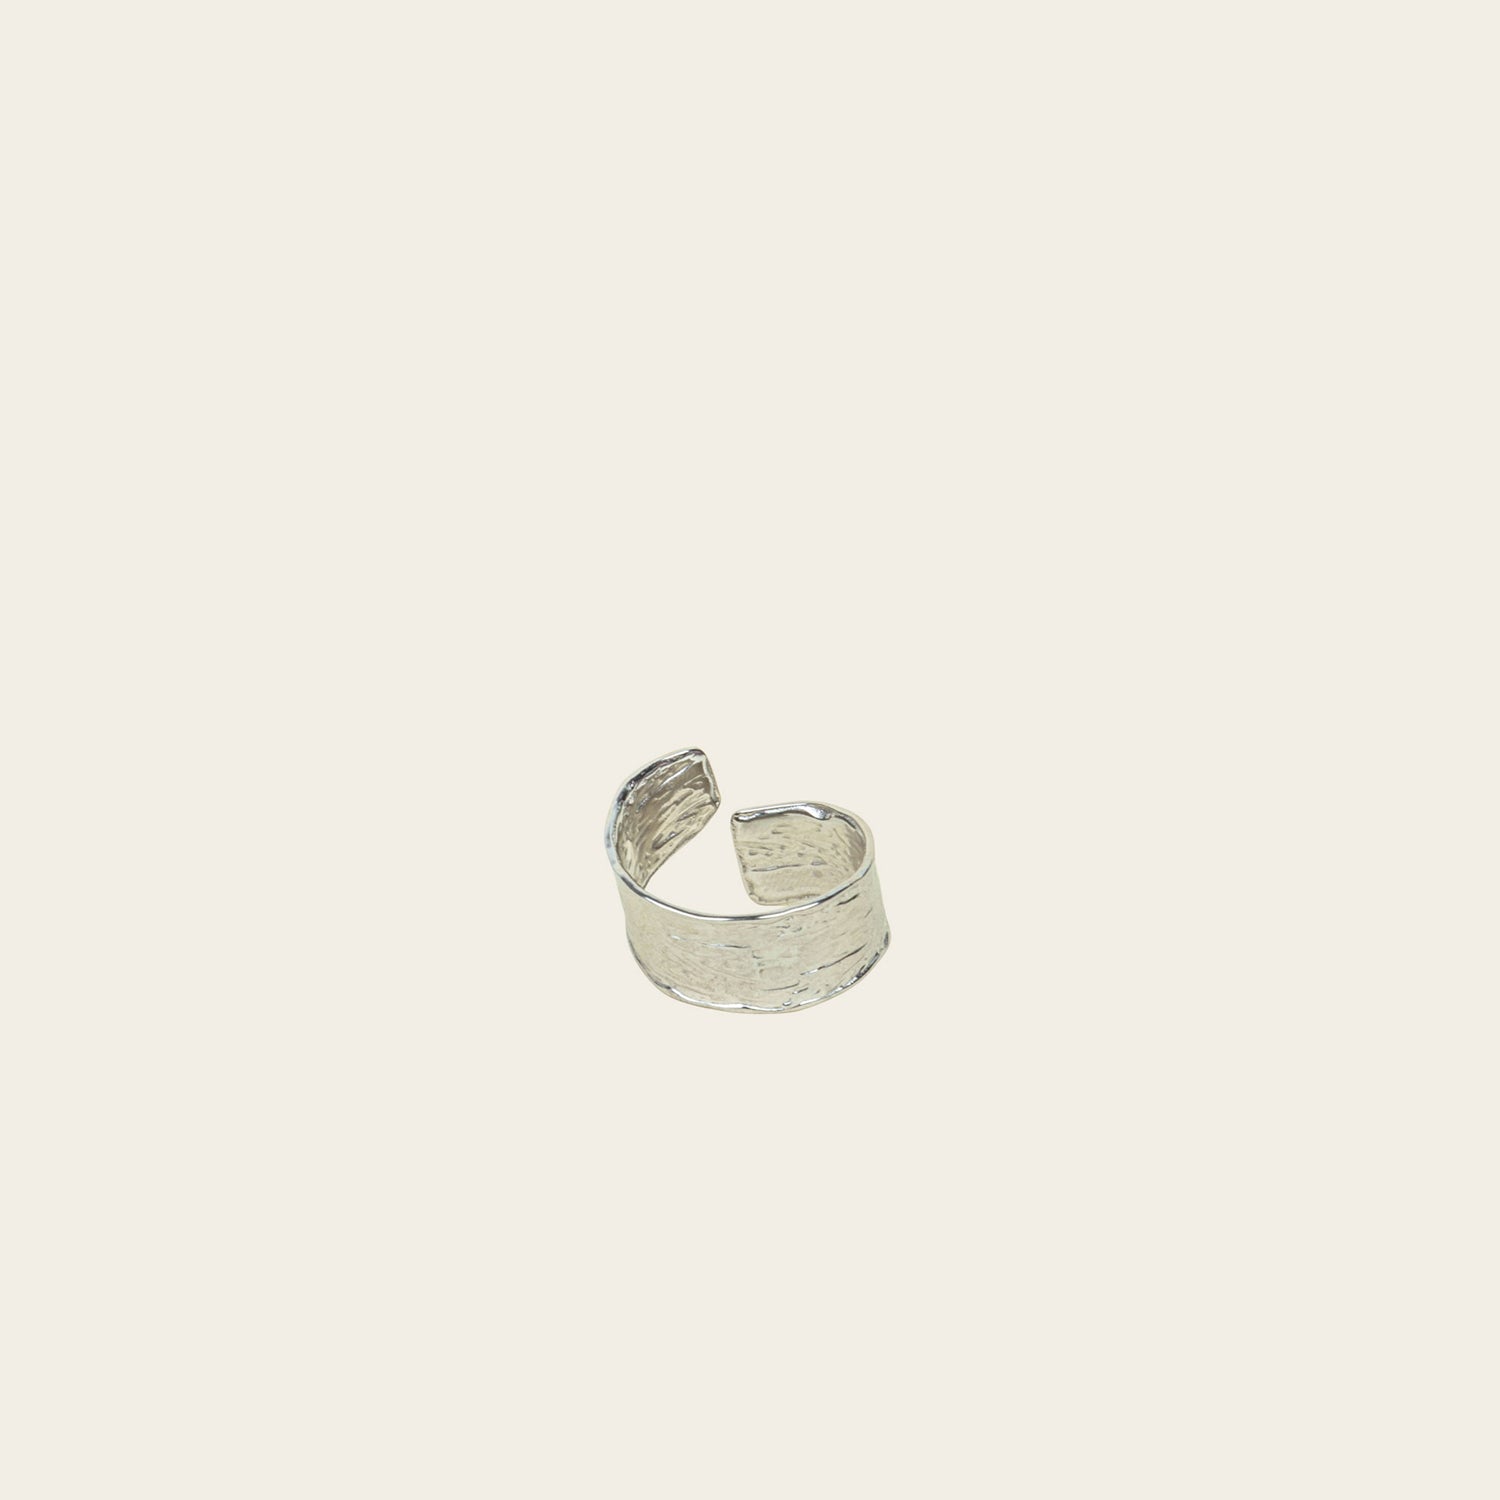 Image of the Textured Curl Ring in Silver offers adjustable sizing between 7-10, while crafted with stainless steel for long-lasting use. It is also water-resistant, non-tarnishing, and free of lead, nickel, and cadmium. Note: this is a single ring.